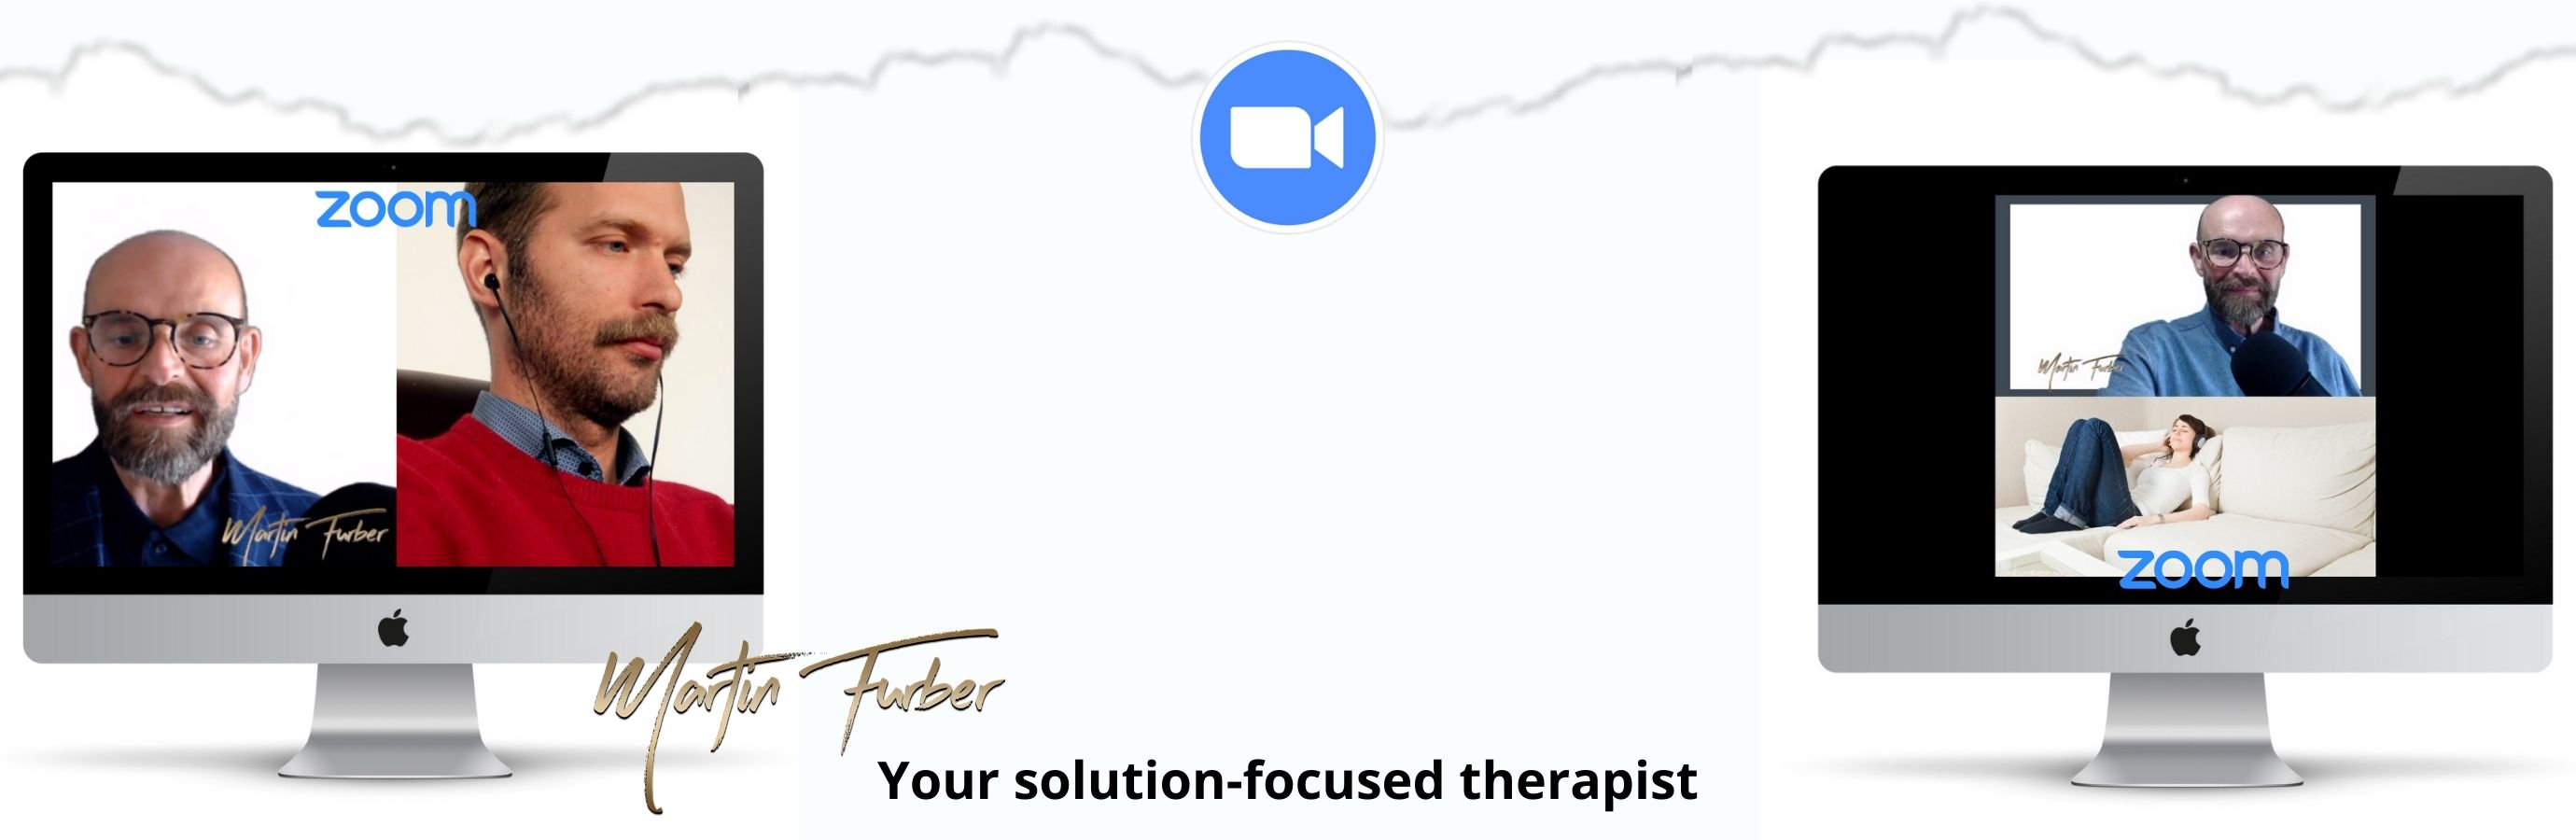 Images of Martin Furber conducting live online therapy sessions via zoom with various clients